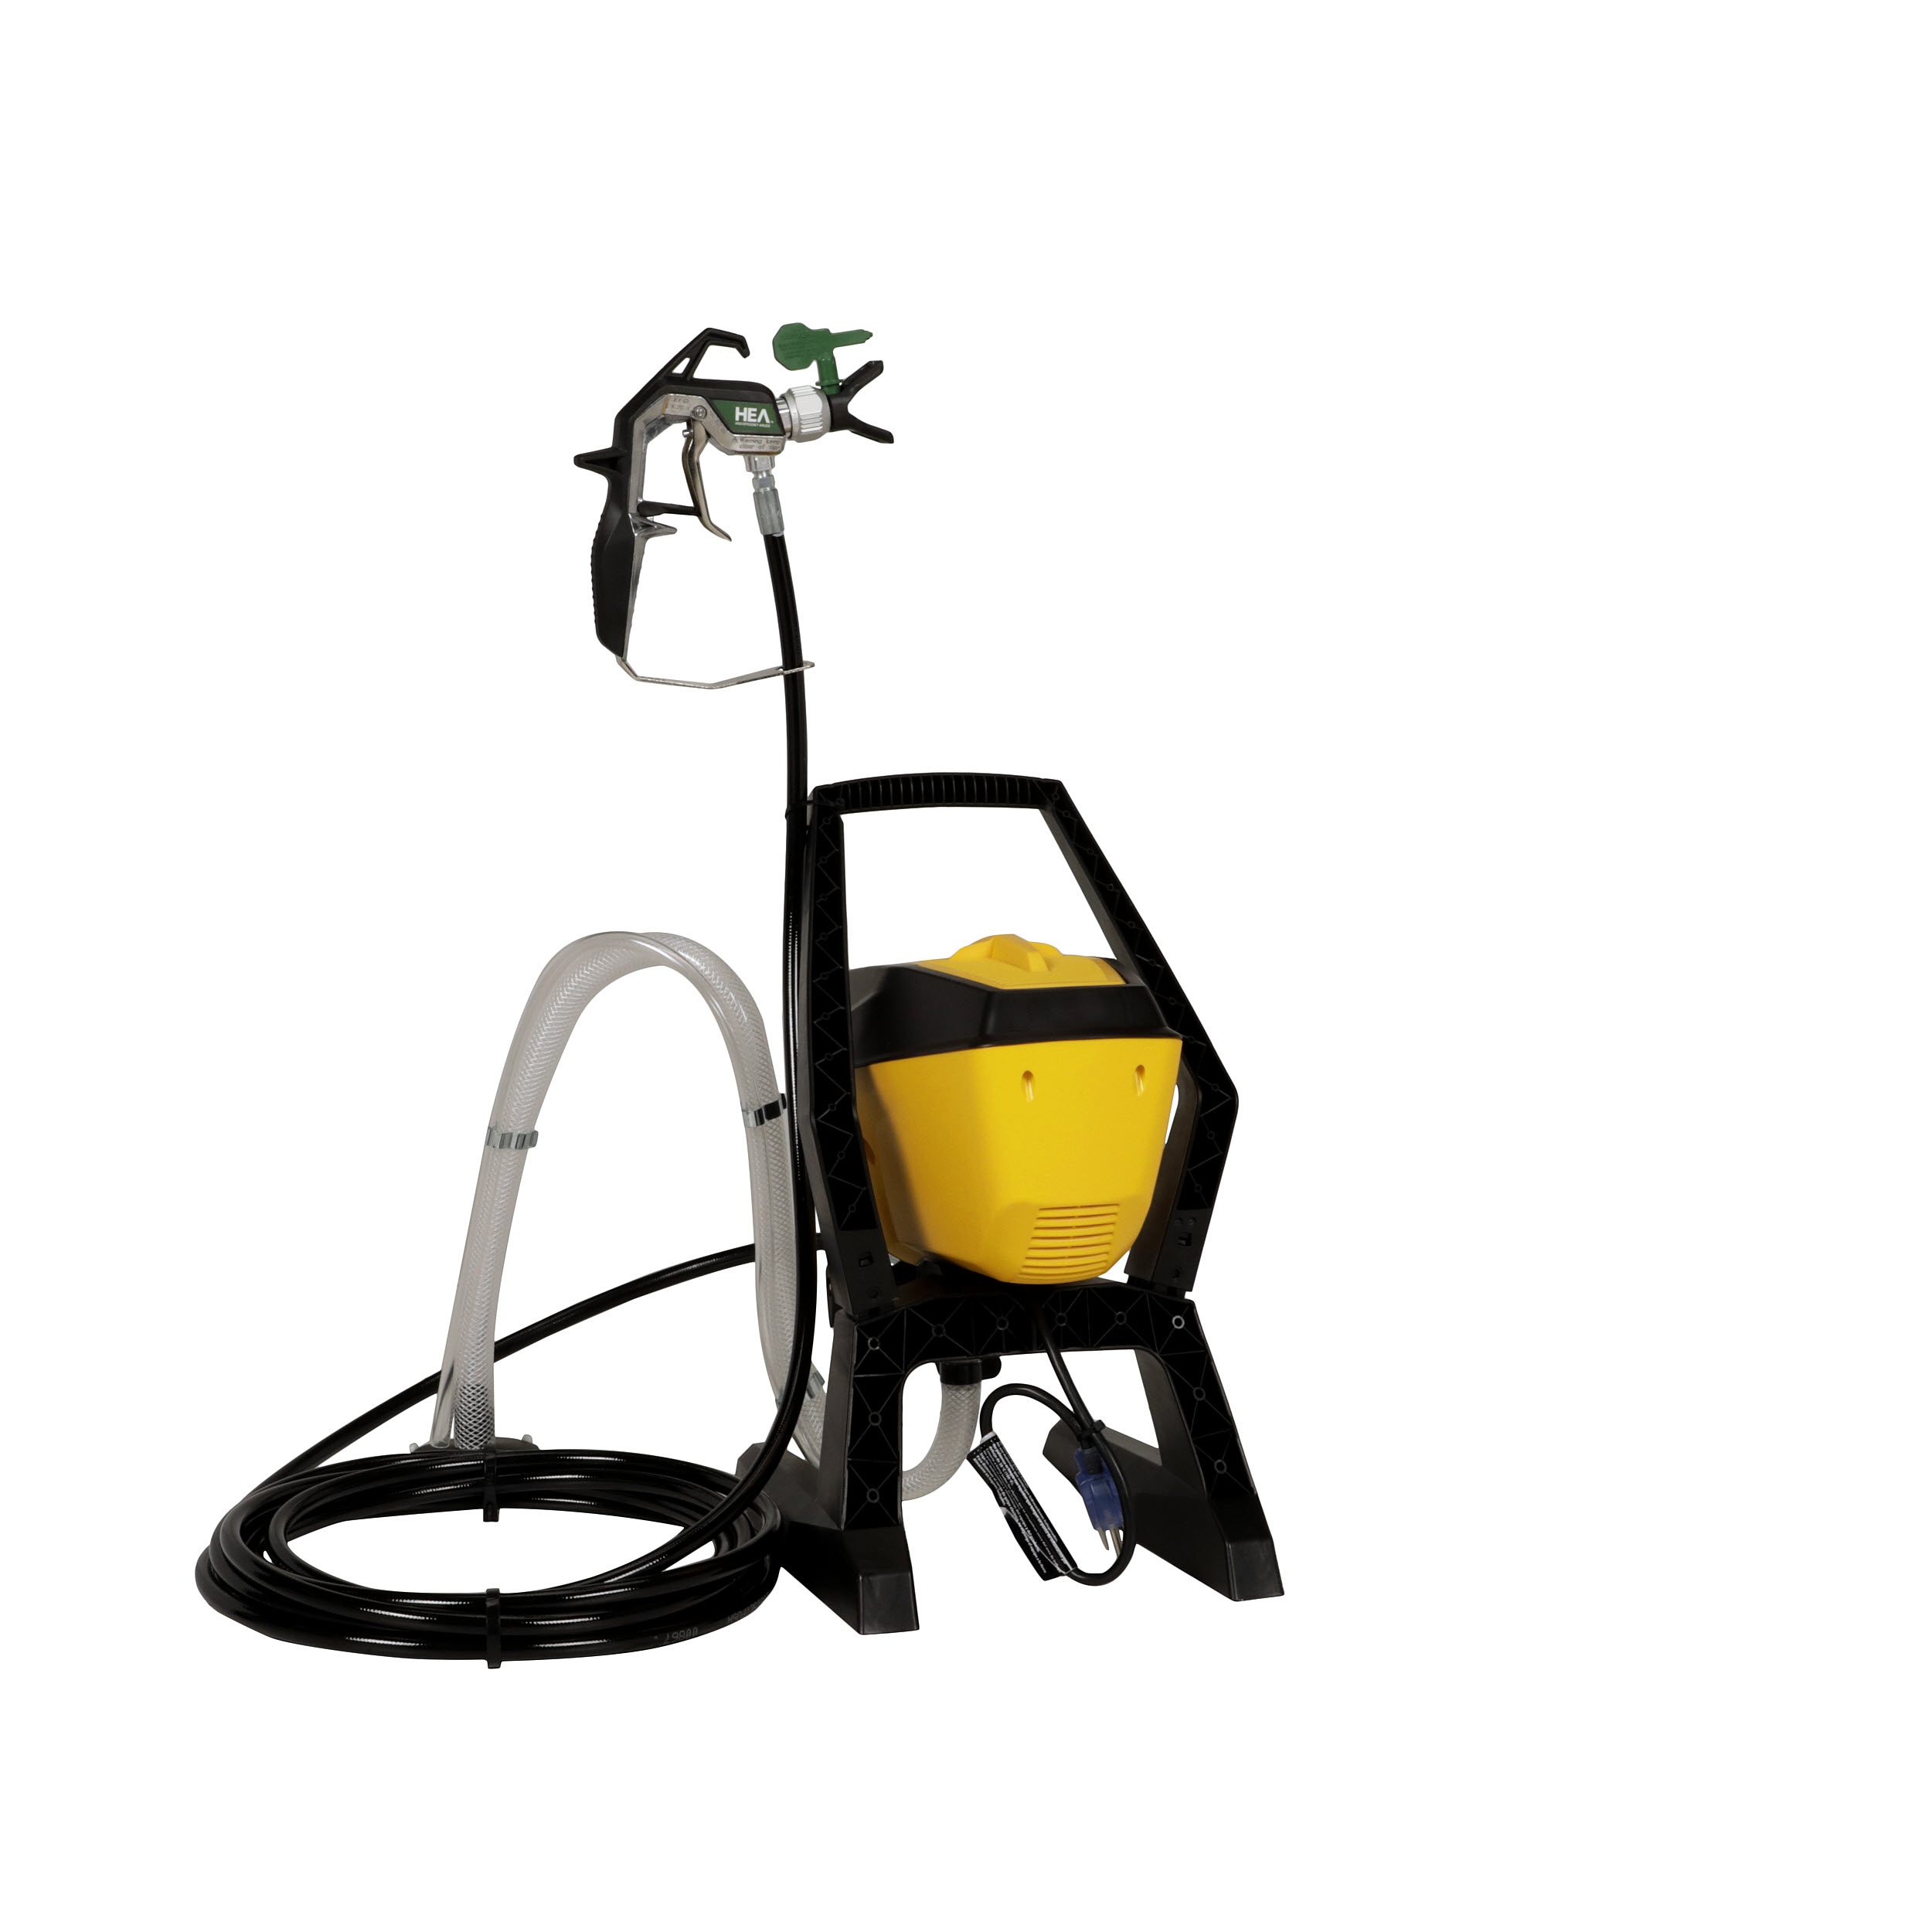 High Airless Pro Overspray Efficiency Paint Sprayer, with Low Control Wagner 150